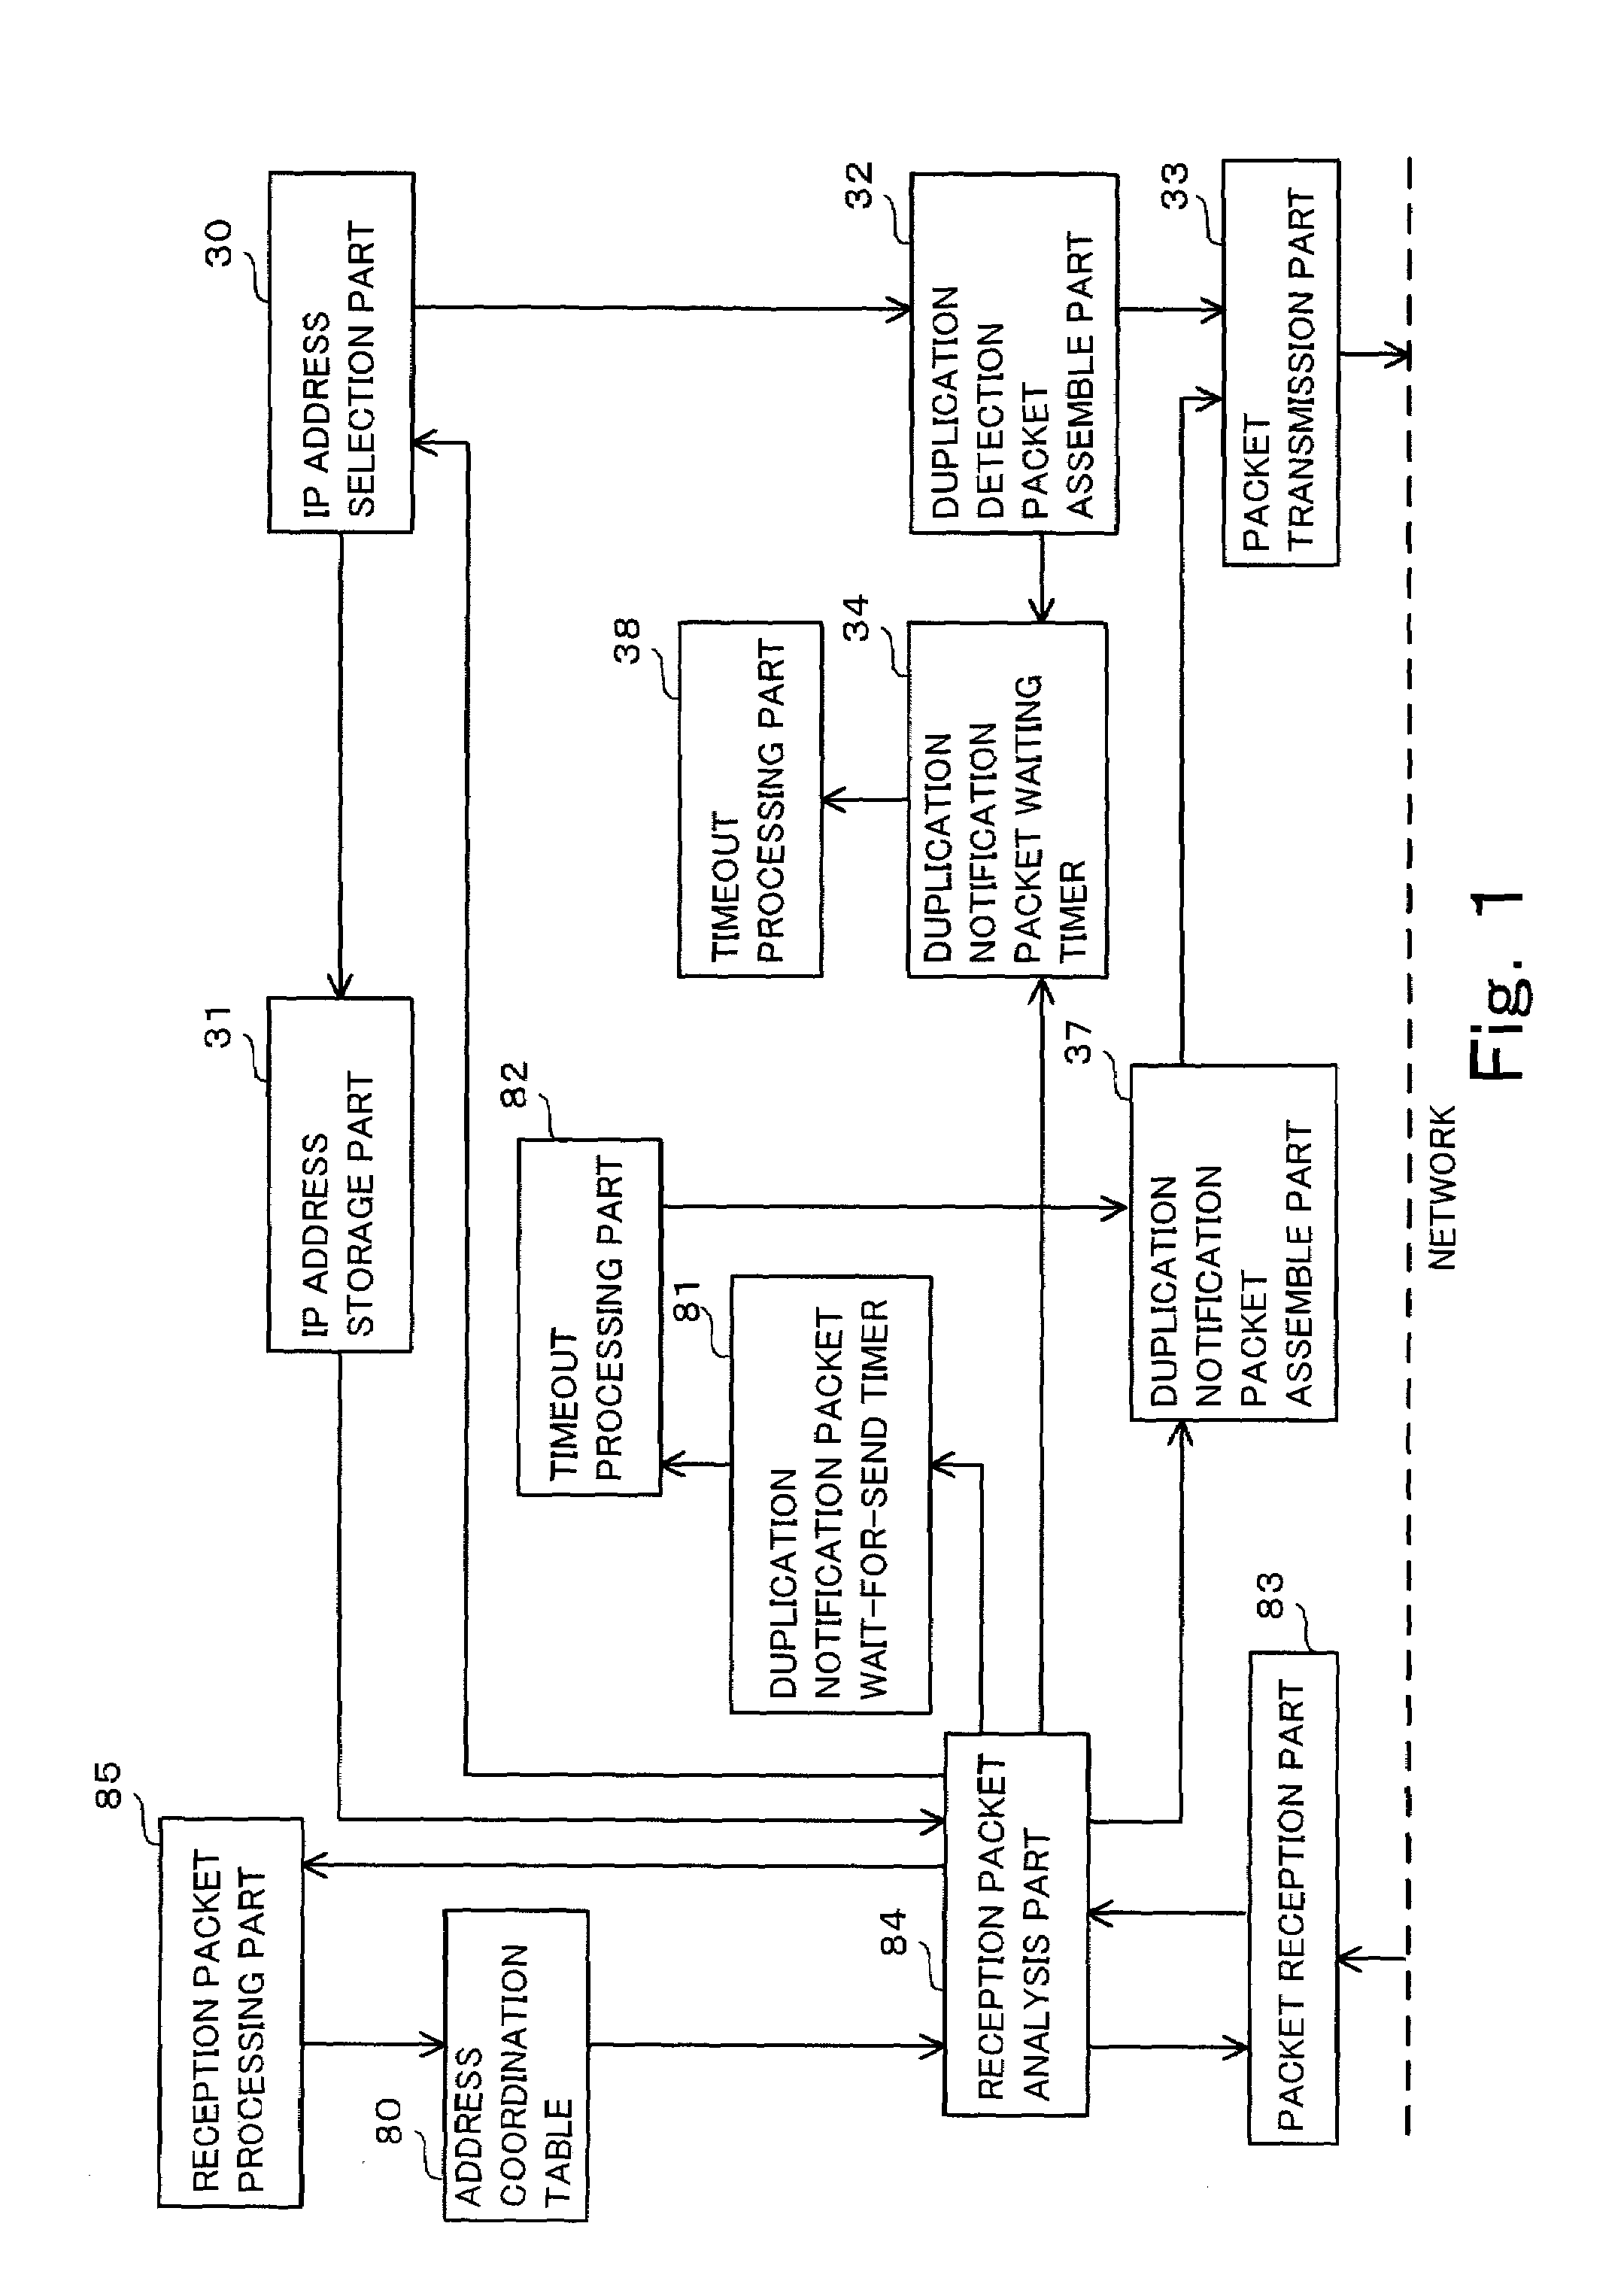 Method for resolving duplication of terminal identifiers in a wireless communication system